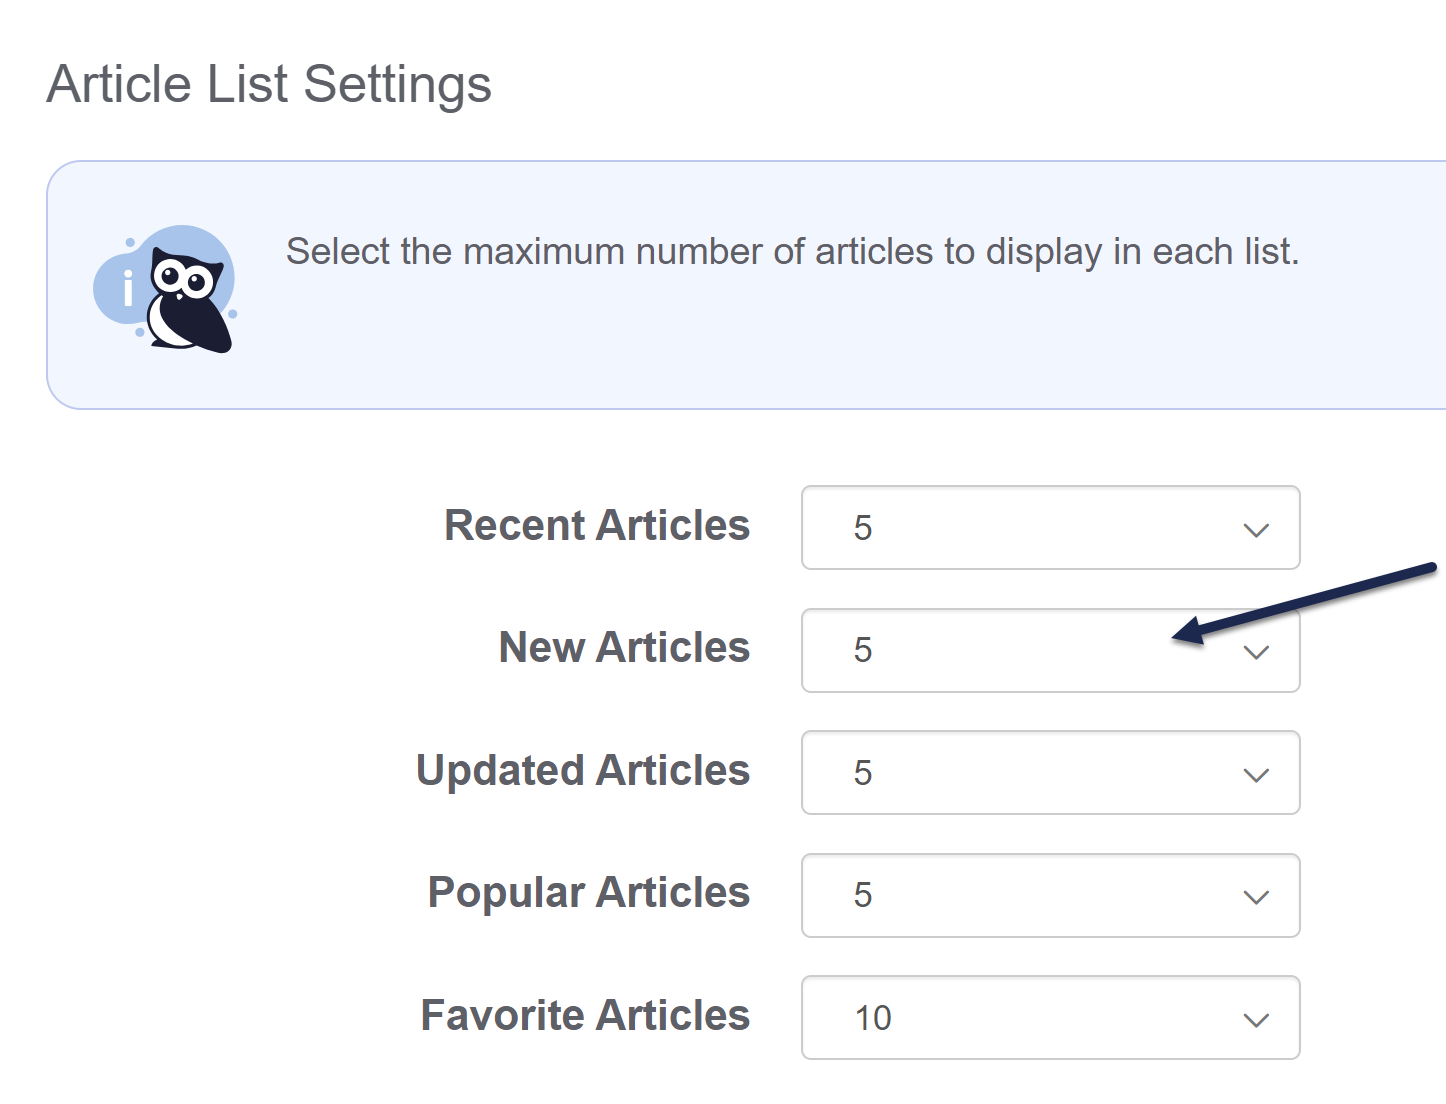 The Article List Settings section of the Basic Settings page. An arrow points to the dropdown for New Articles.